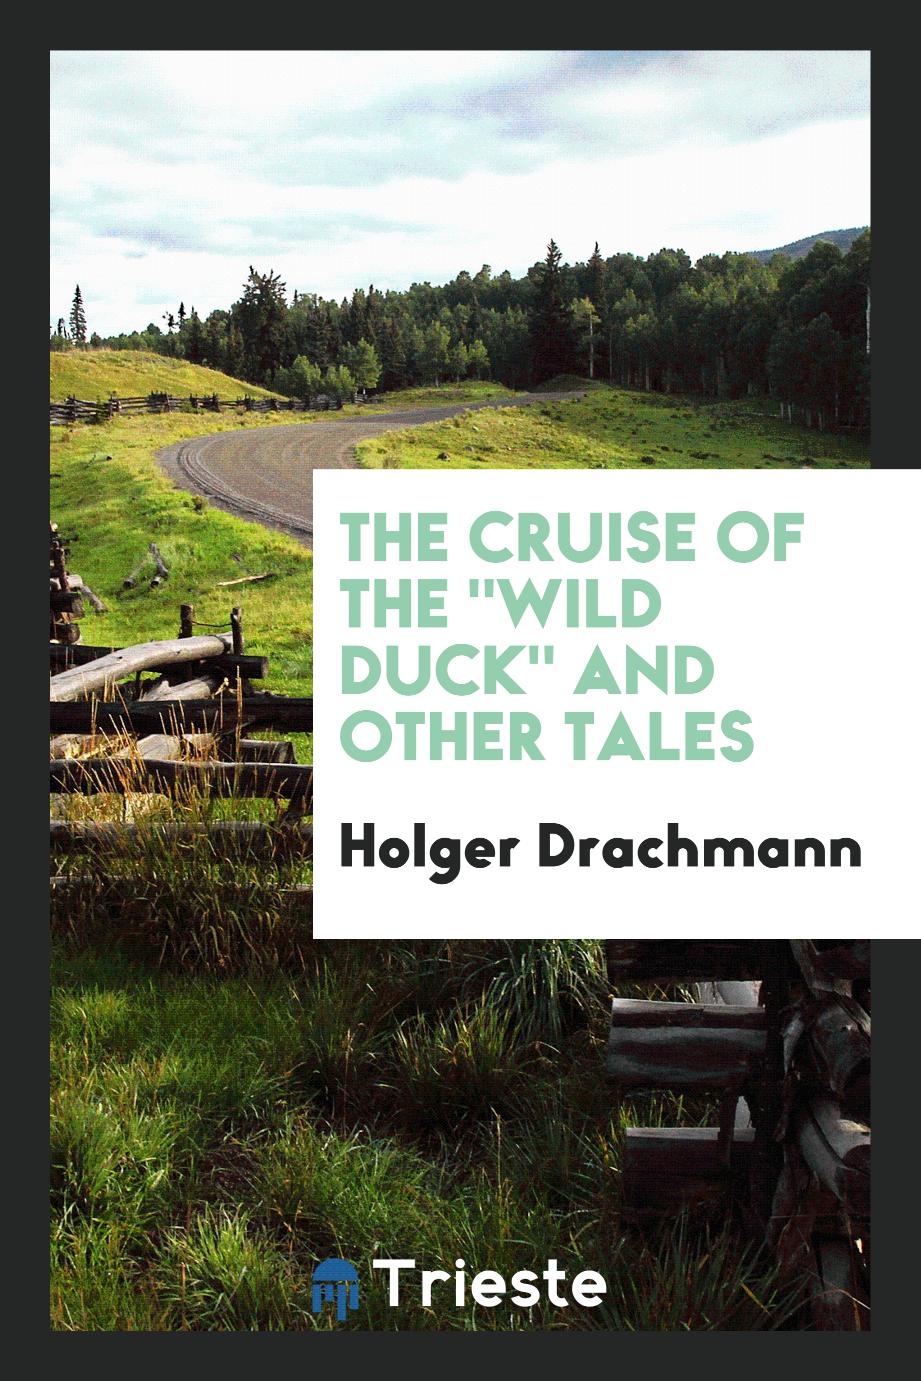 The cruise of the "Wild Duck" and other tales